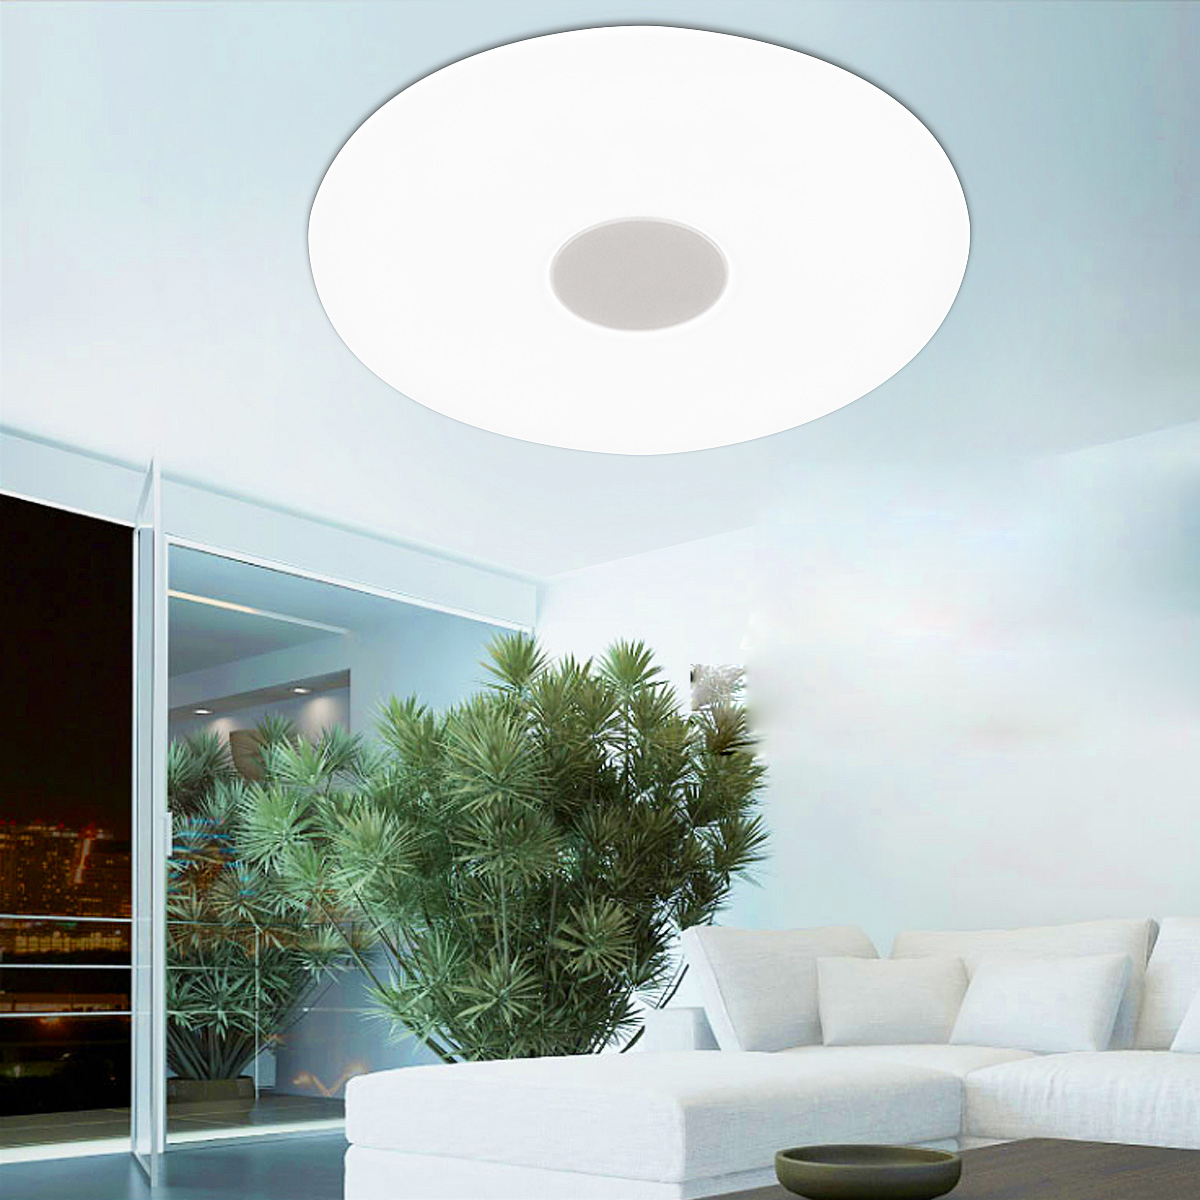 

24W 2250LM Super Thin LED Ceiling Down Light Modern Living Room Kitchen Lamp